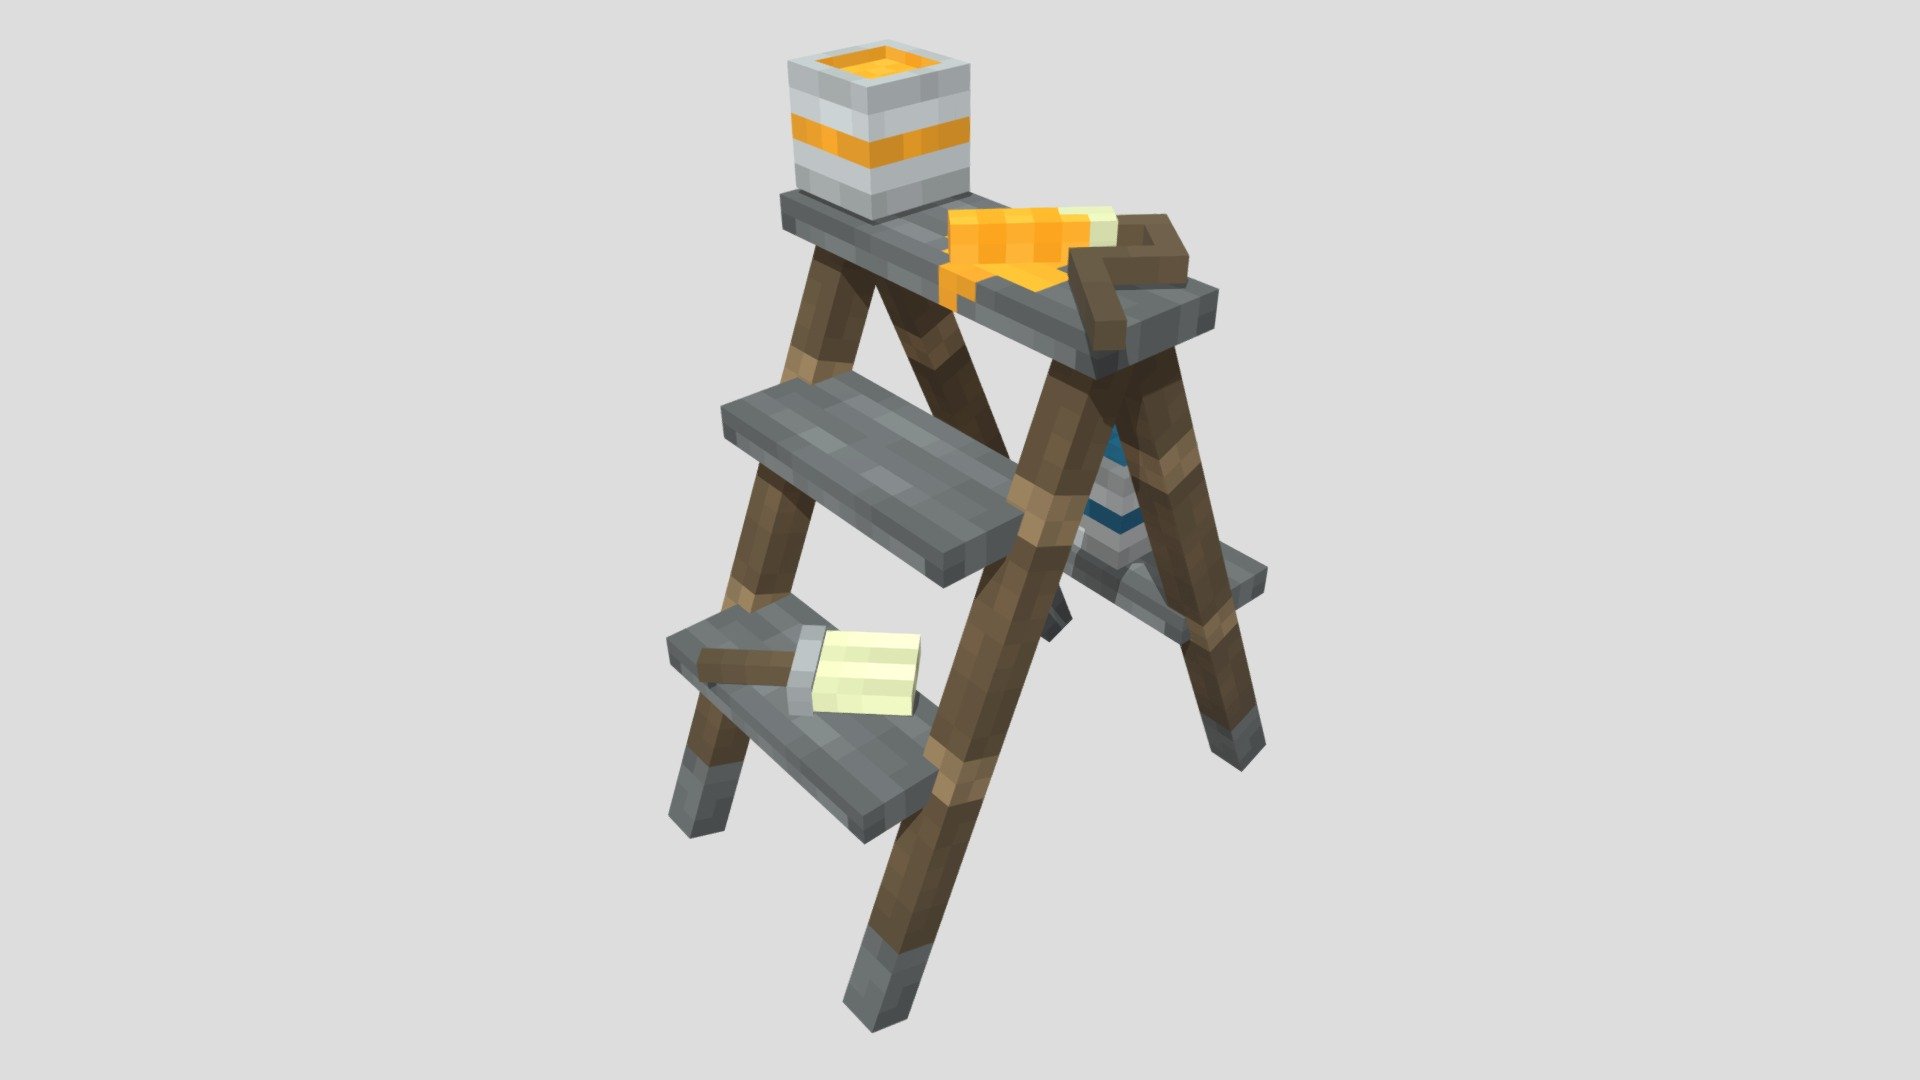 Paint ladder for minecraft 

Made in @blockbench

Render in @sketchfab - Paint ladder - 3D model by Quizer 3d model